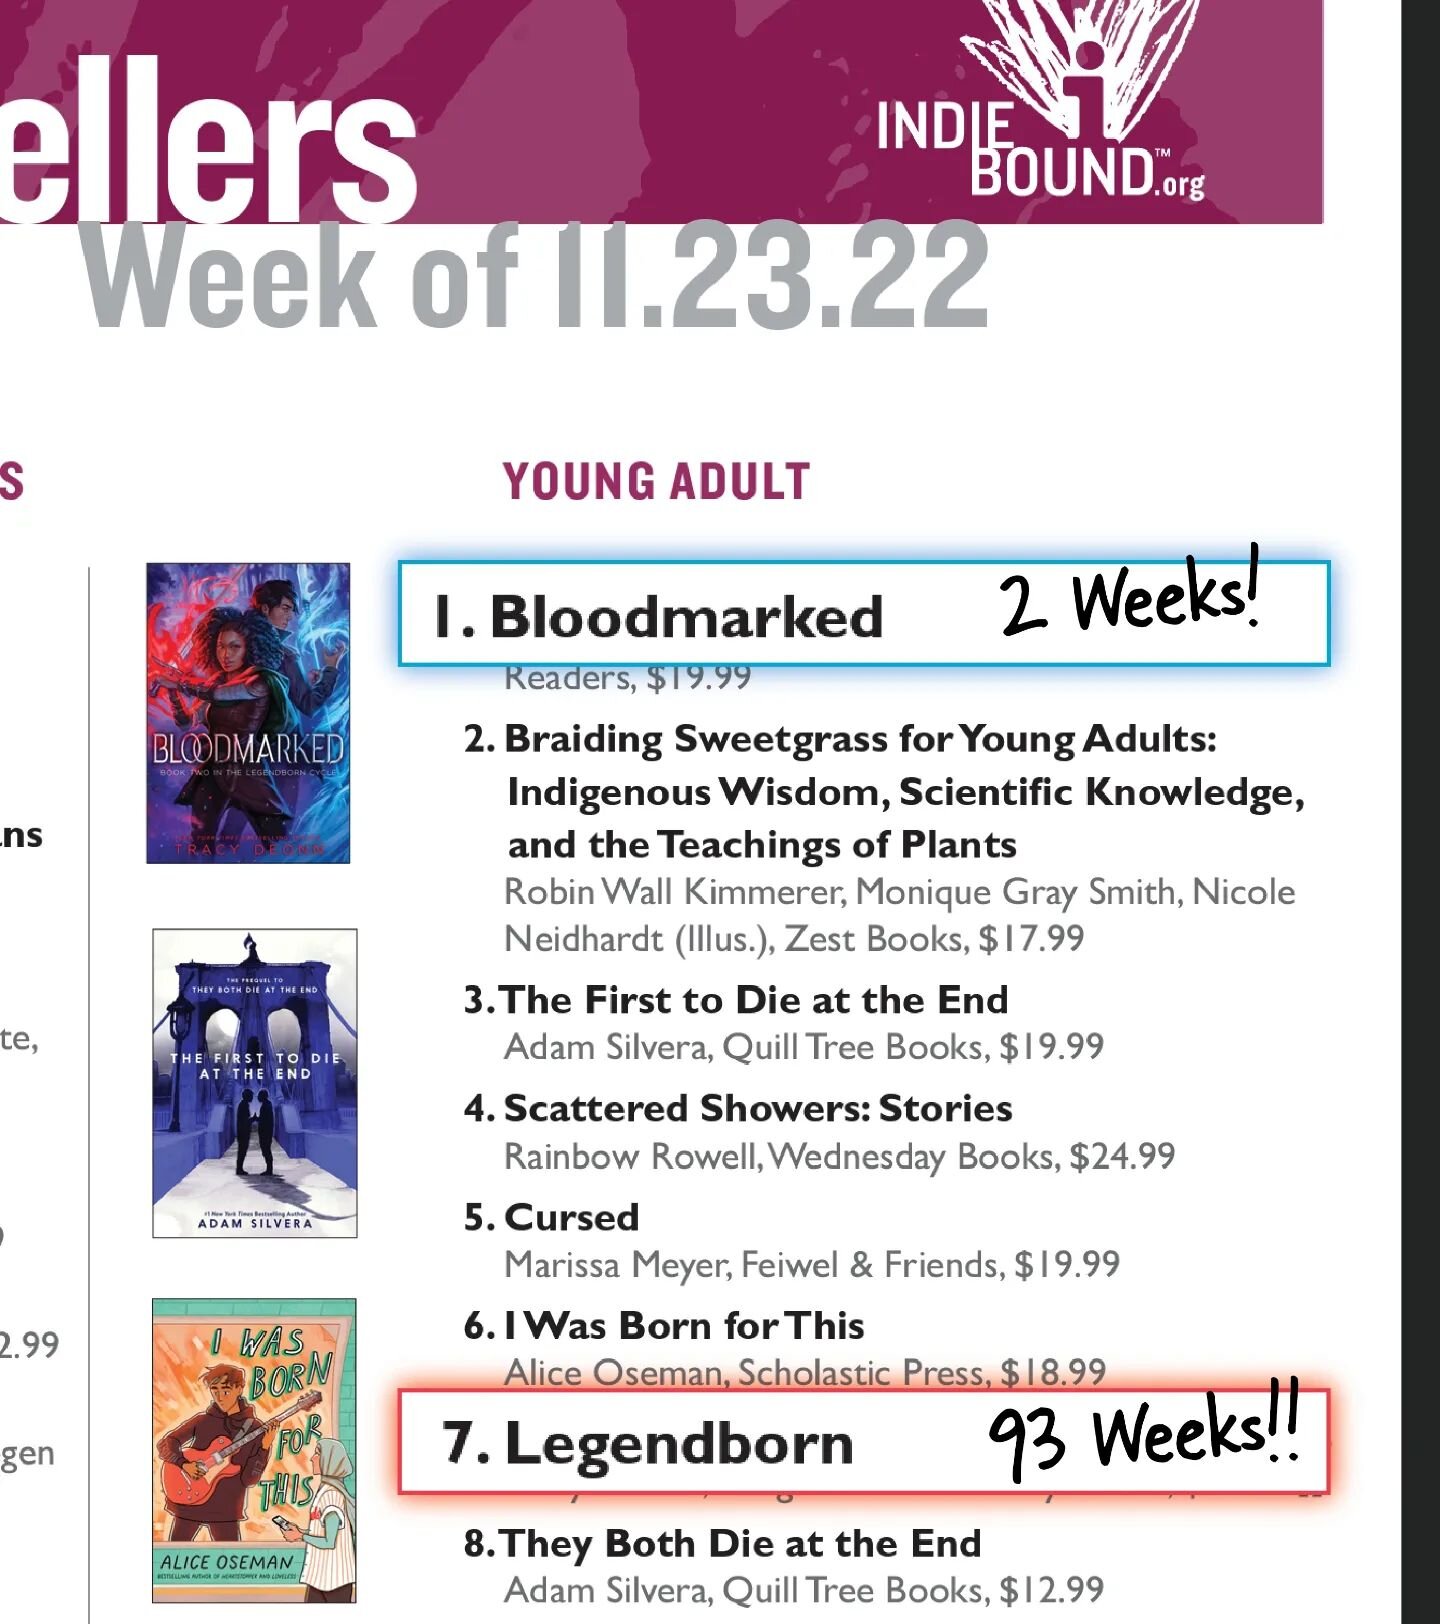 BLOODMARKED is a #1 Indie Bestseller for a second week in a row AND on the NYT at #3!! And my first book baby, LEGENDBORN, is on her ✨93rd✨ week on the Indie list at #7!

💙🥰❤️

Thank you, everyone, for your support of me and Bree. I have been trave